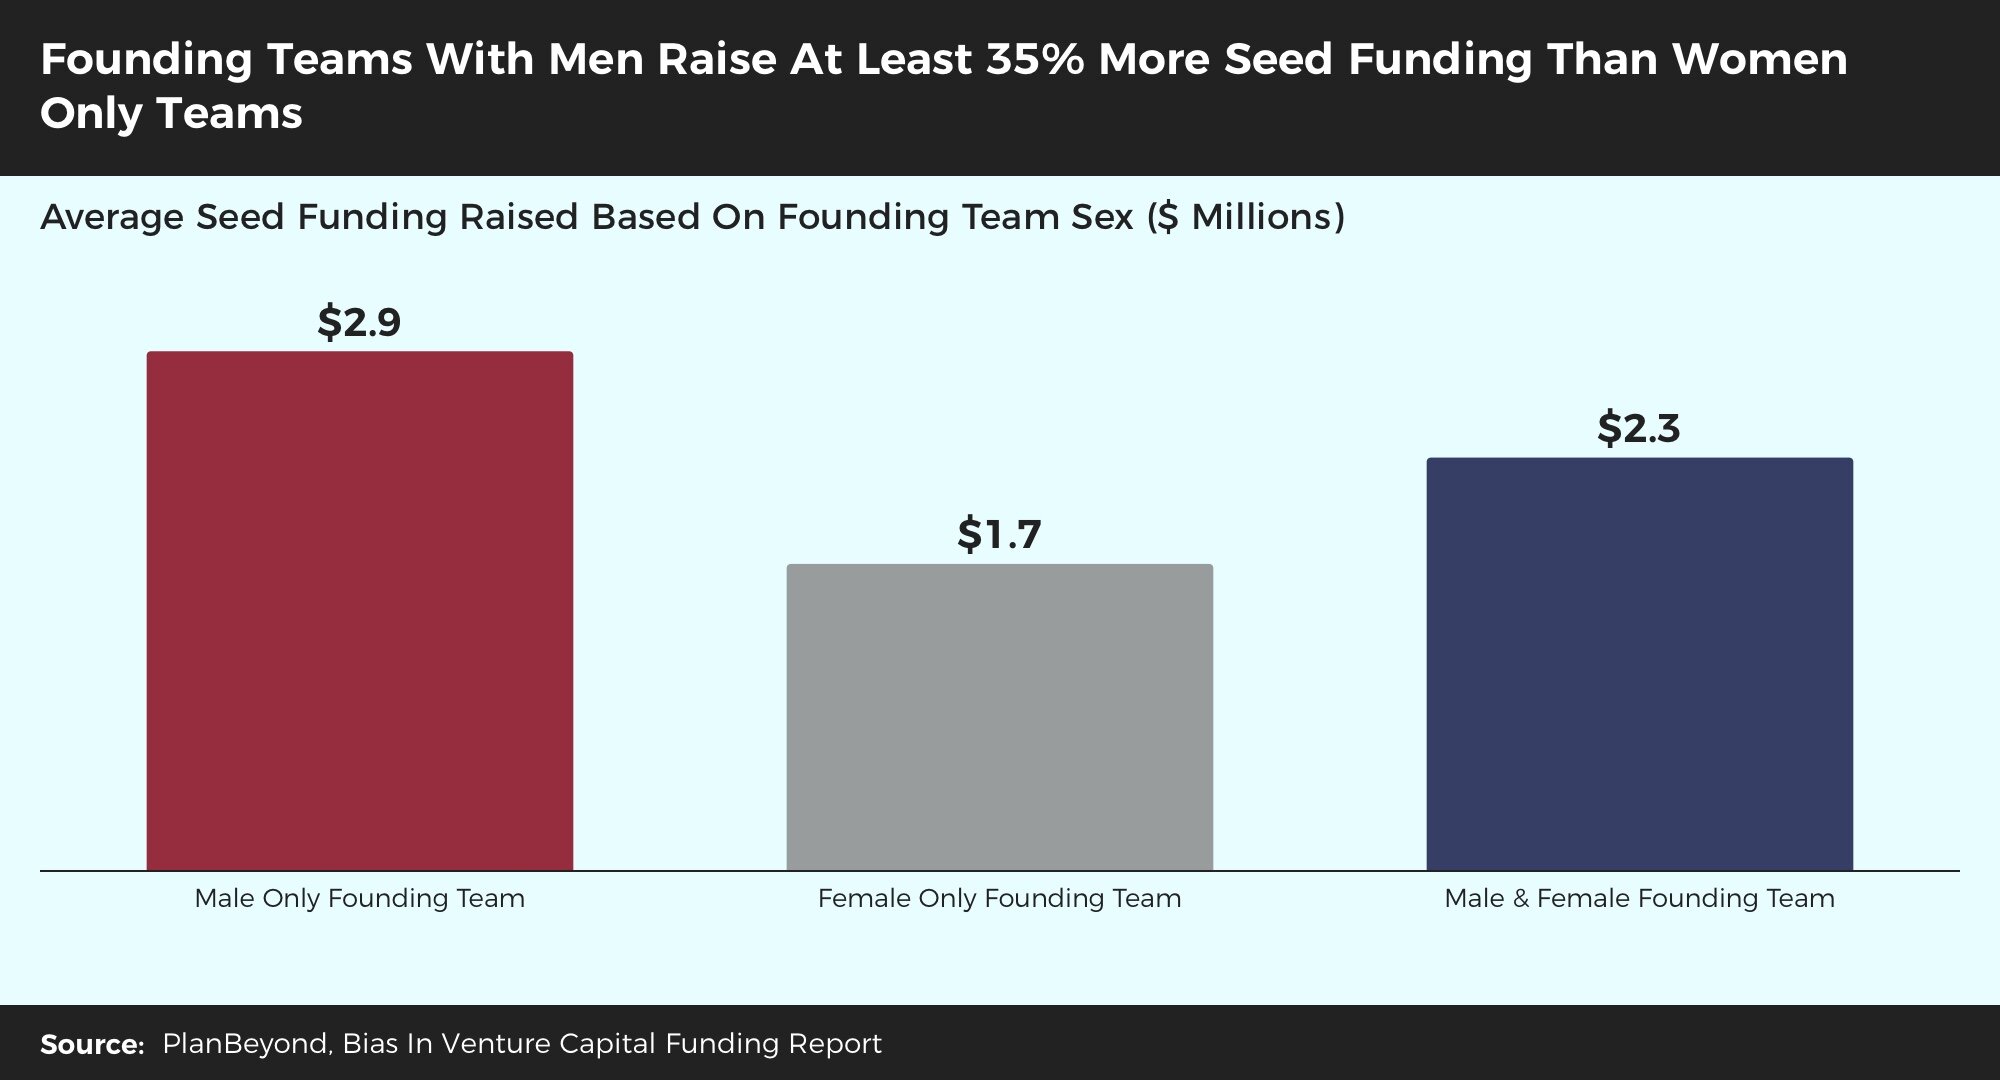 Bias+In+Venture+Funding+Report+-+Teams+With+Men+Raise+More+Seed+Funds+than+Women